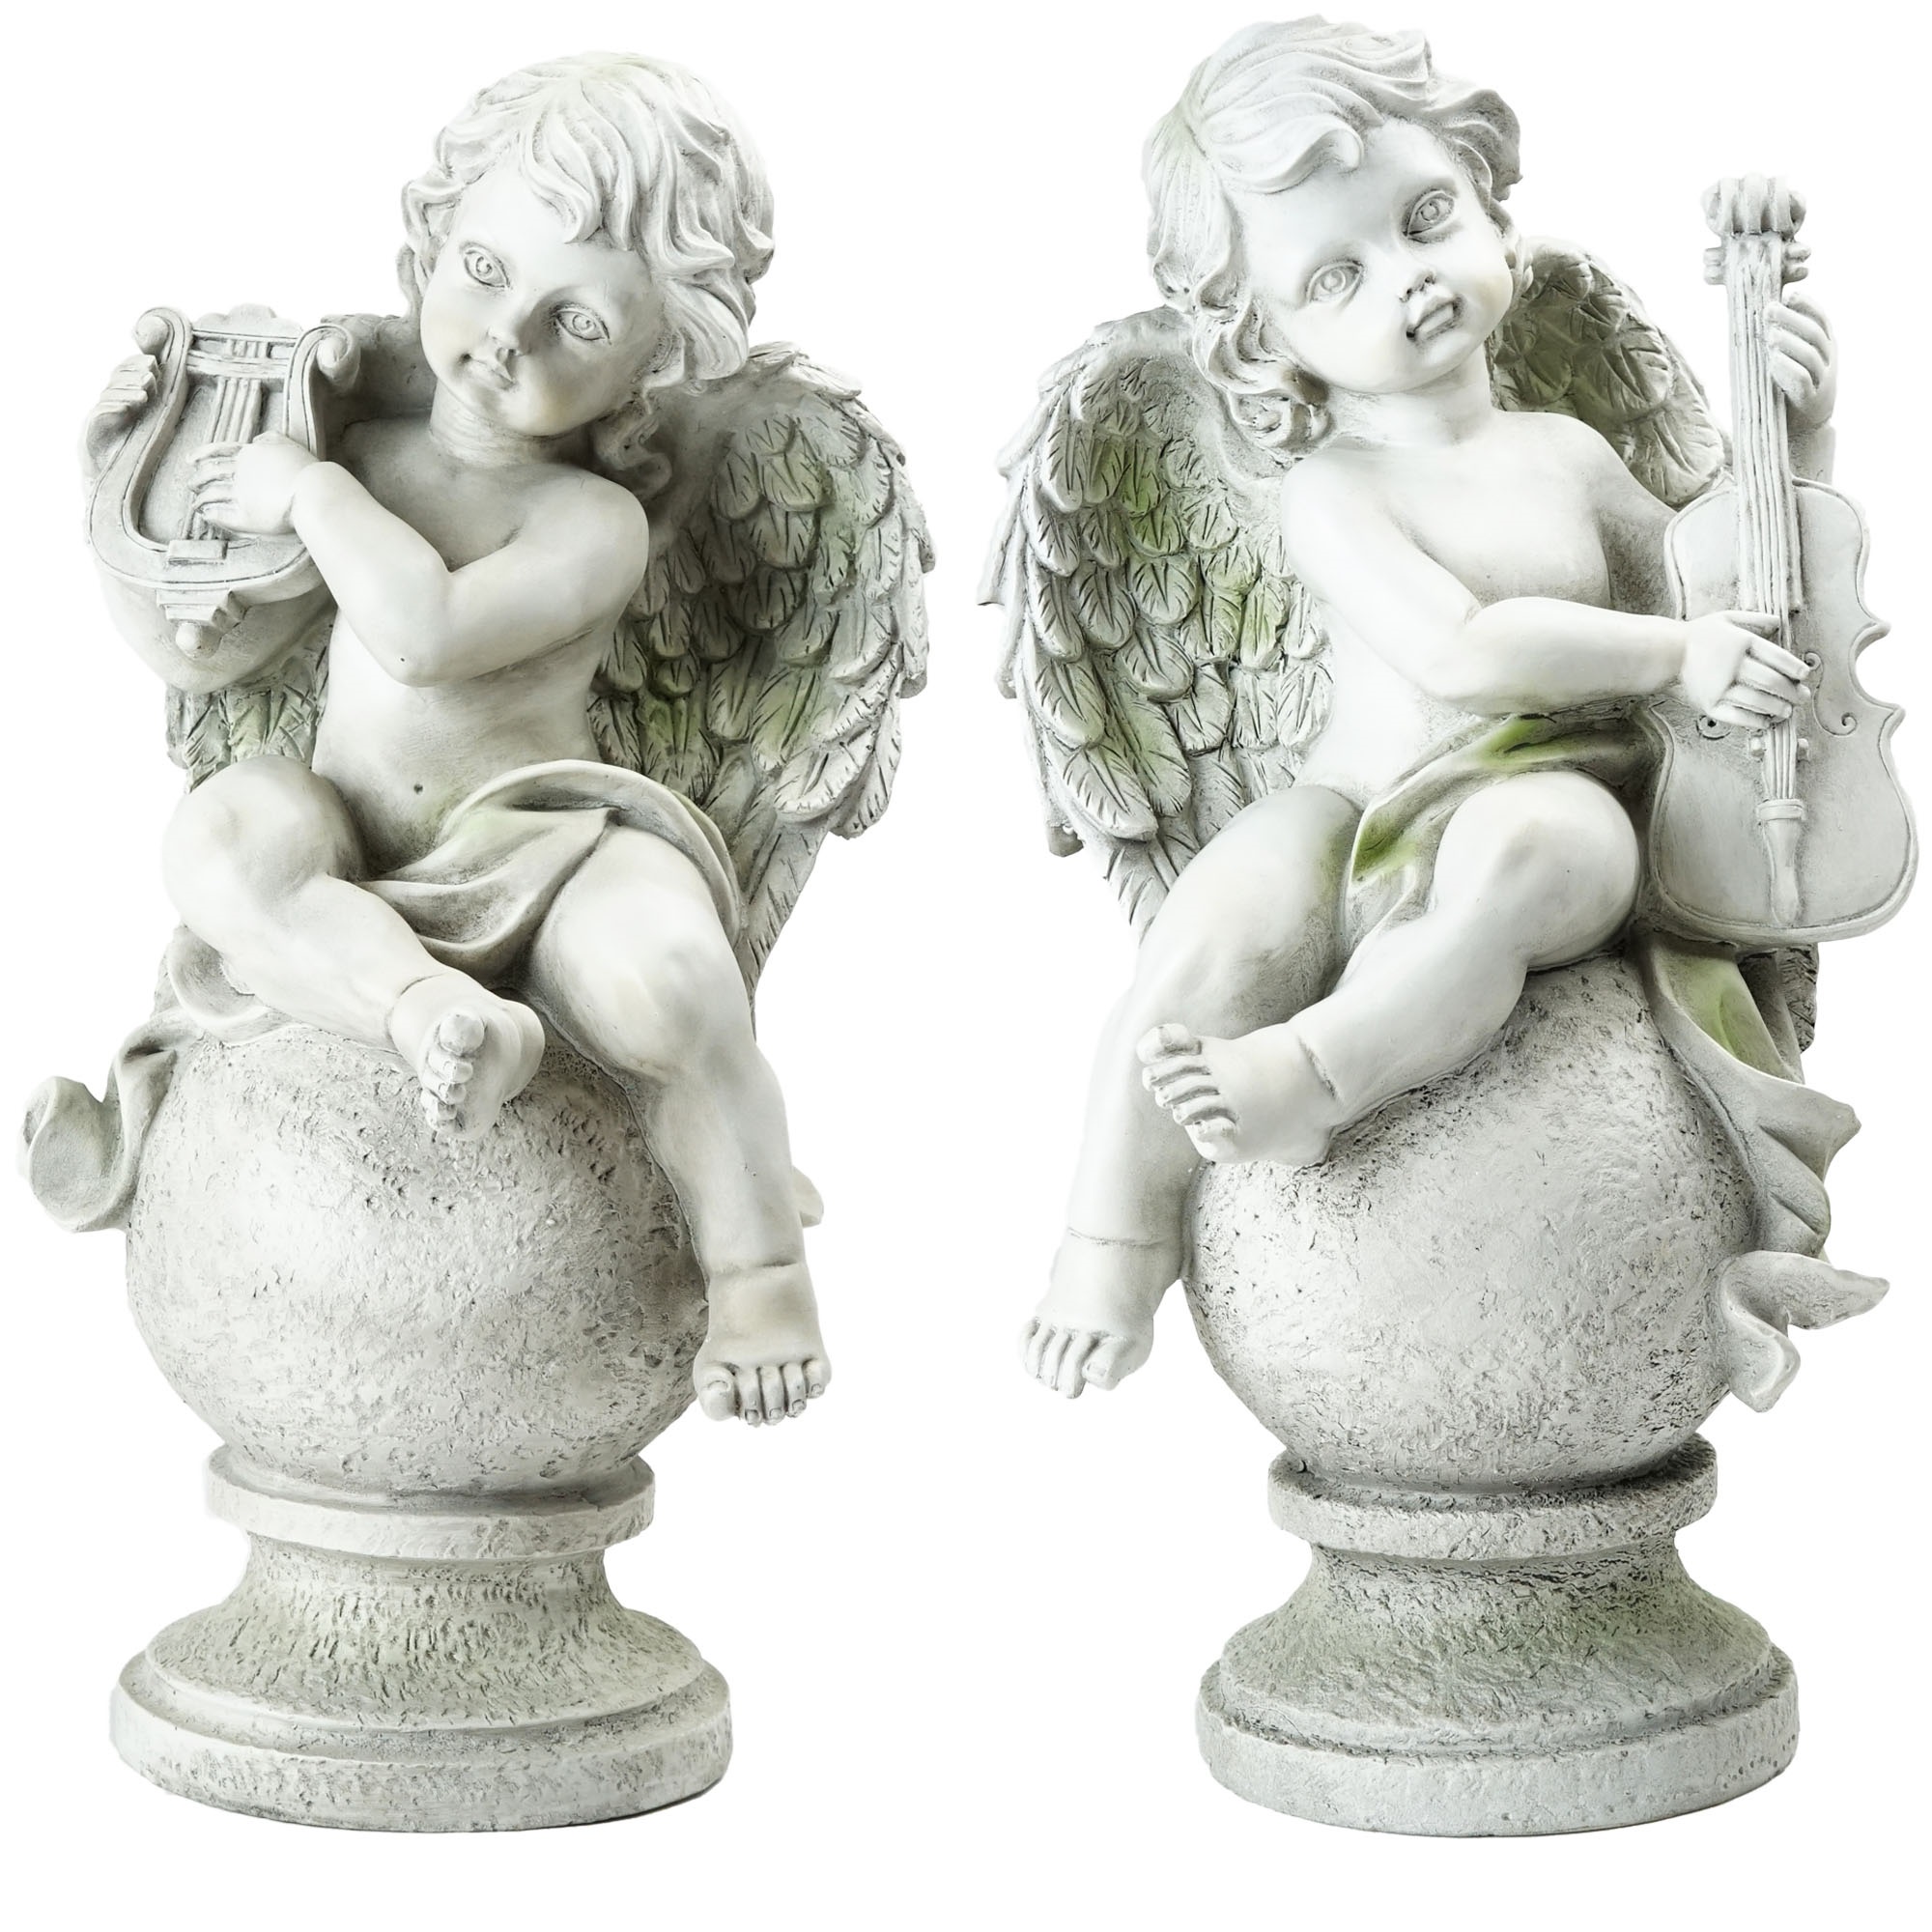 Northlight Set of 2 Cherub Angels with Instruments Sitting Outdoor Patio Garden Statues 14.75" - - image 1 of 2